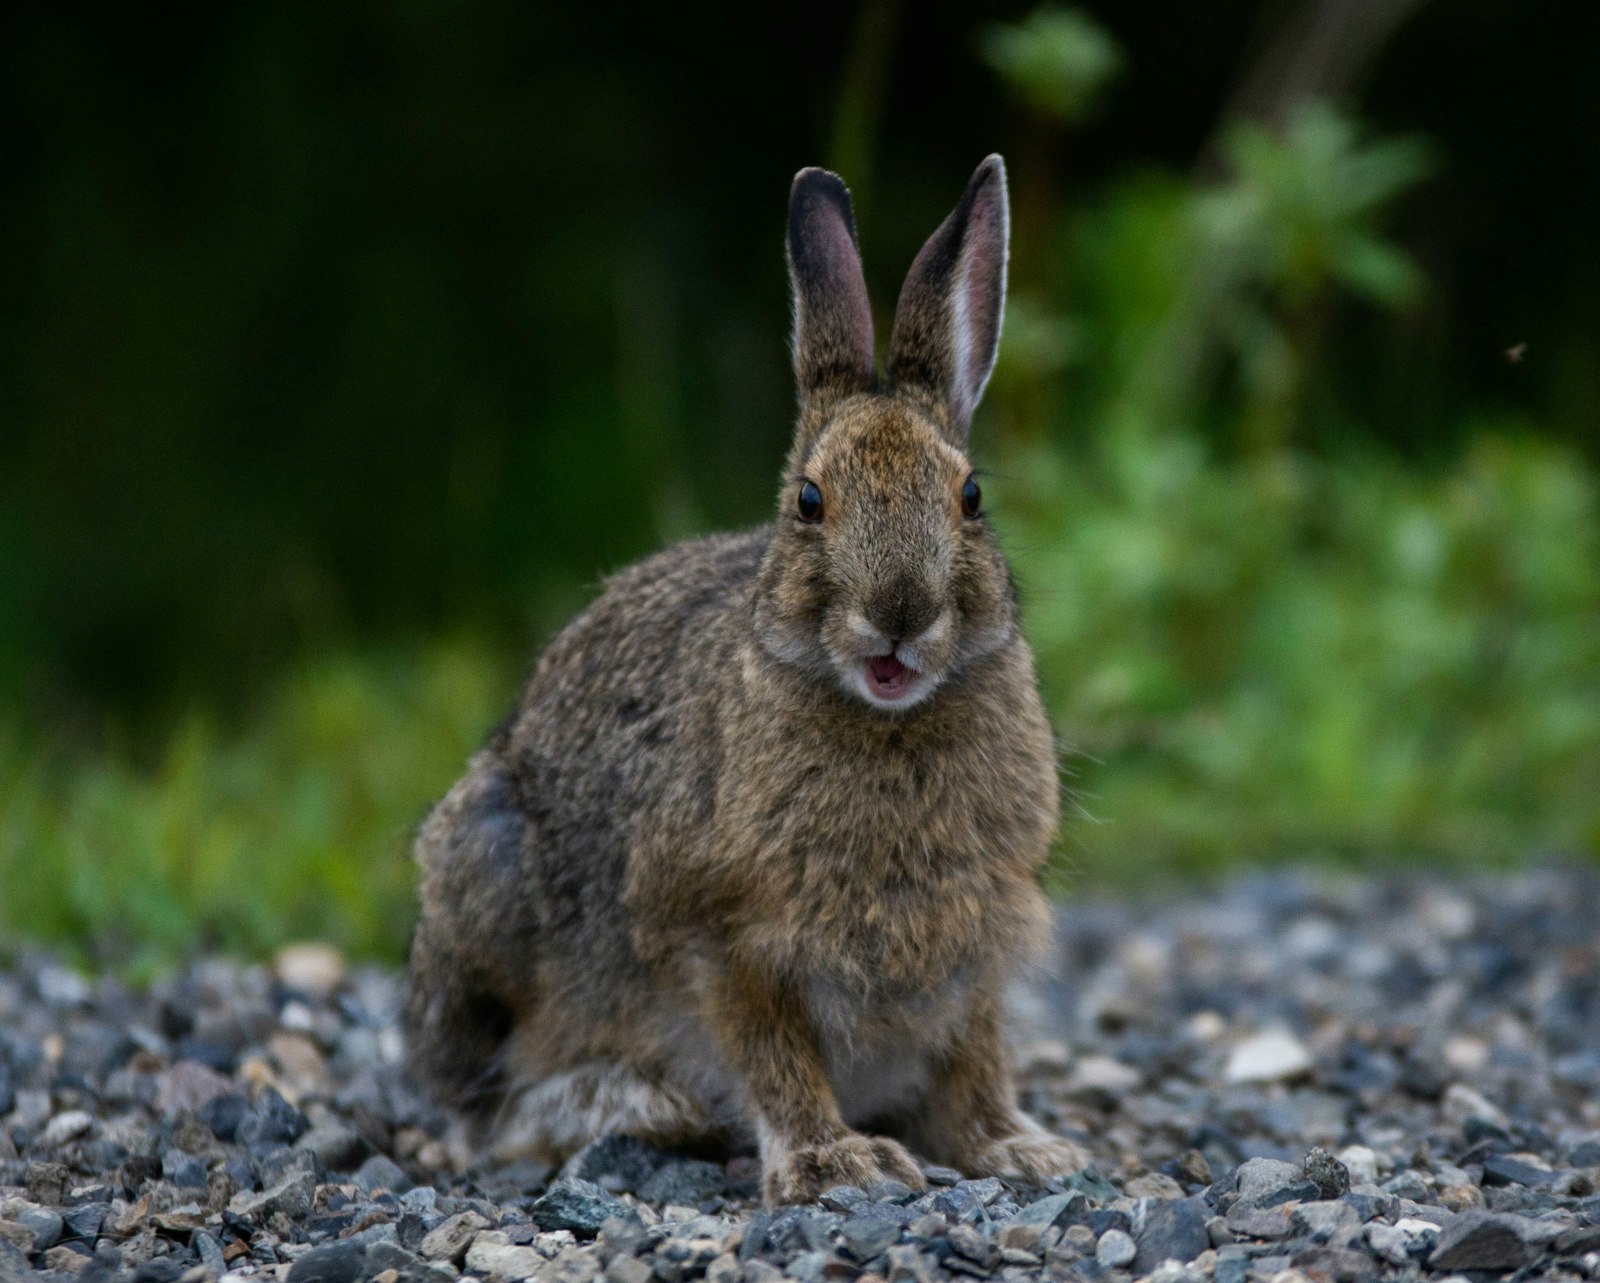 A snowshoe hare with its mouth partially open as it chews food